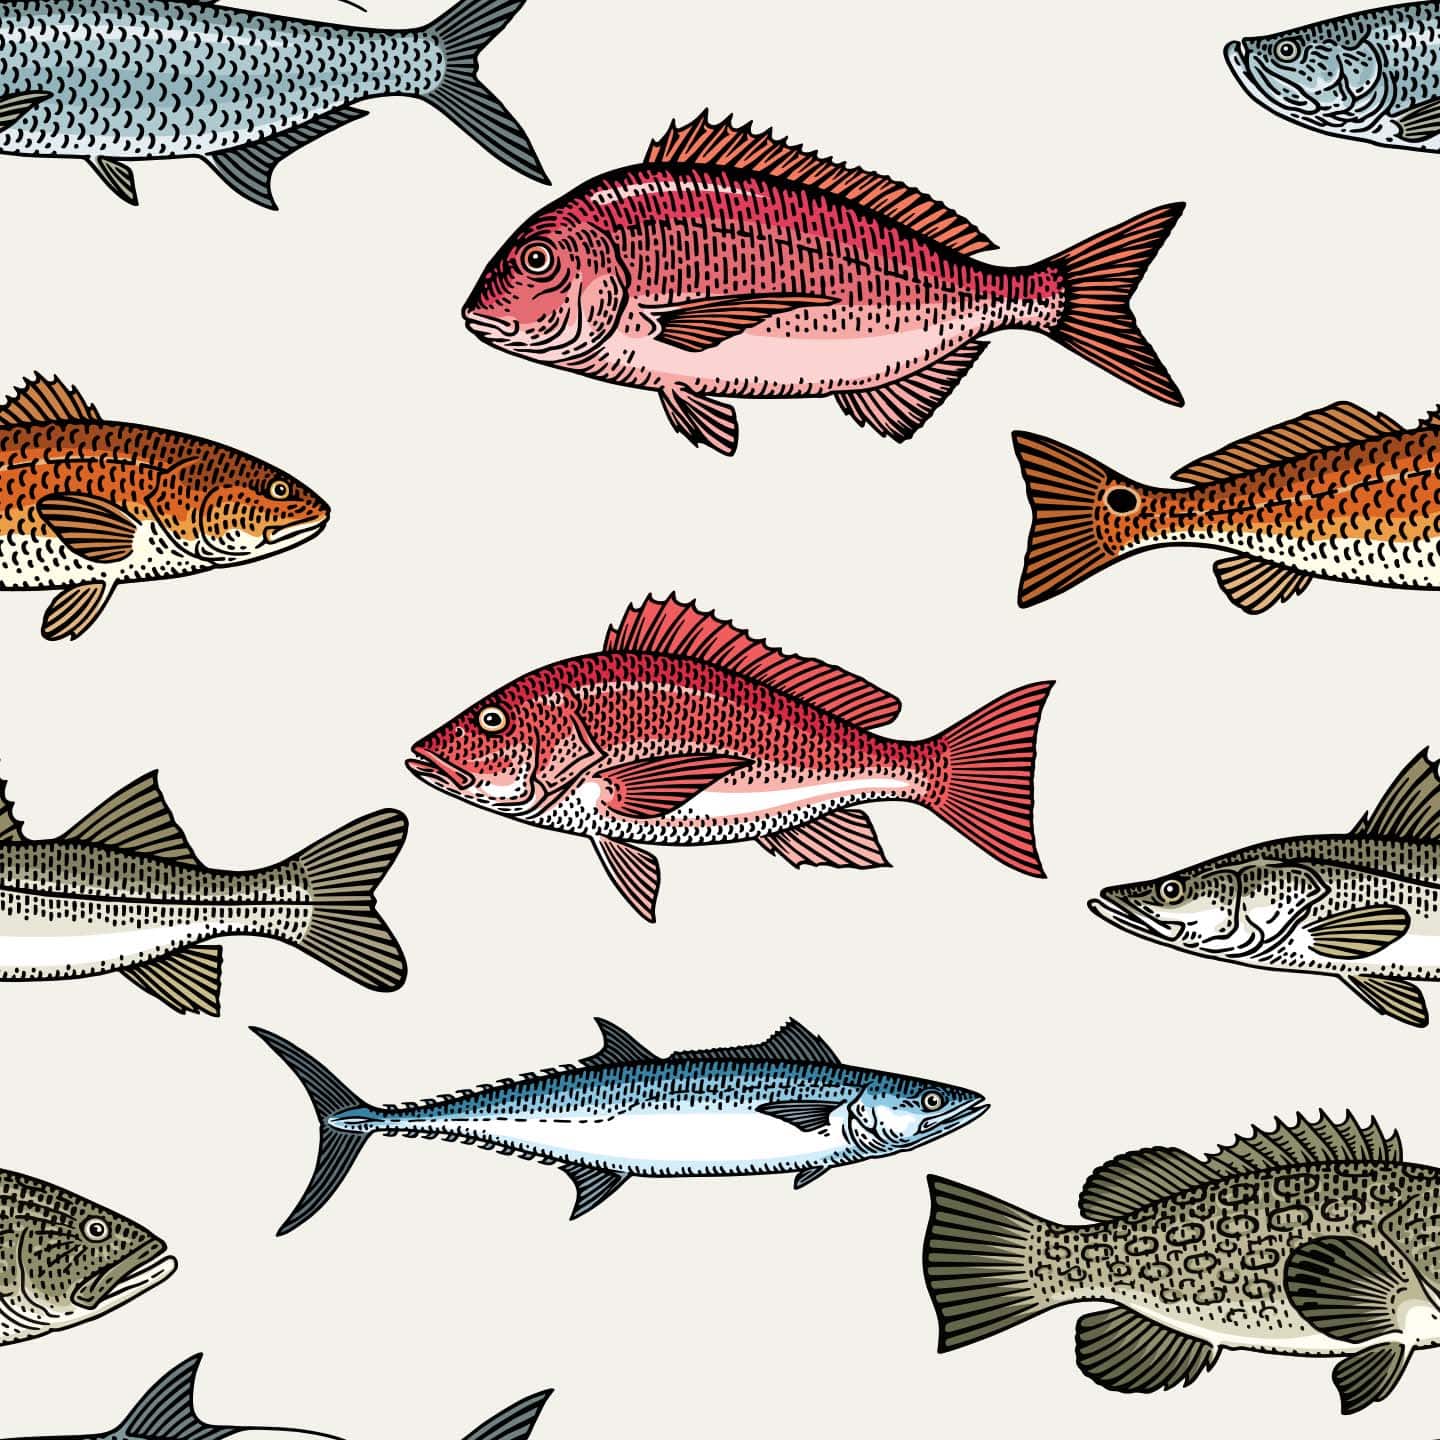 All Your Design Self Adhesive Wallpaper Fish Design Waterproof  Laminated  Wall Sticker for Home Decor Living Room Bedroom Hall Kids Room 10x15  Feet  Amazonin Home Improvement